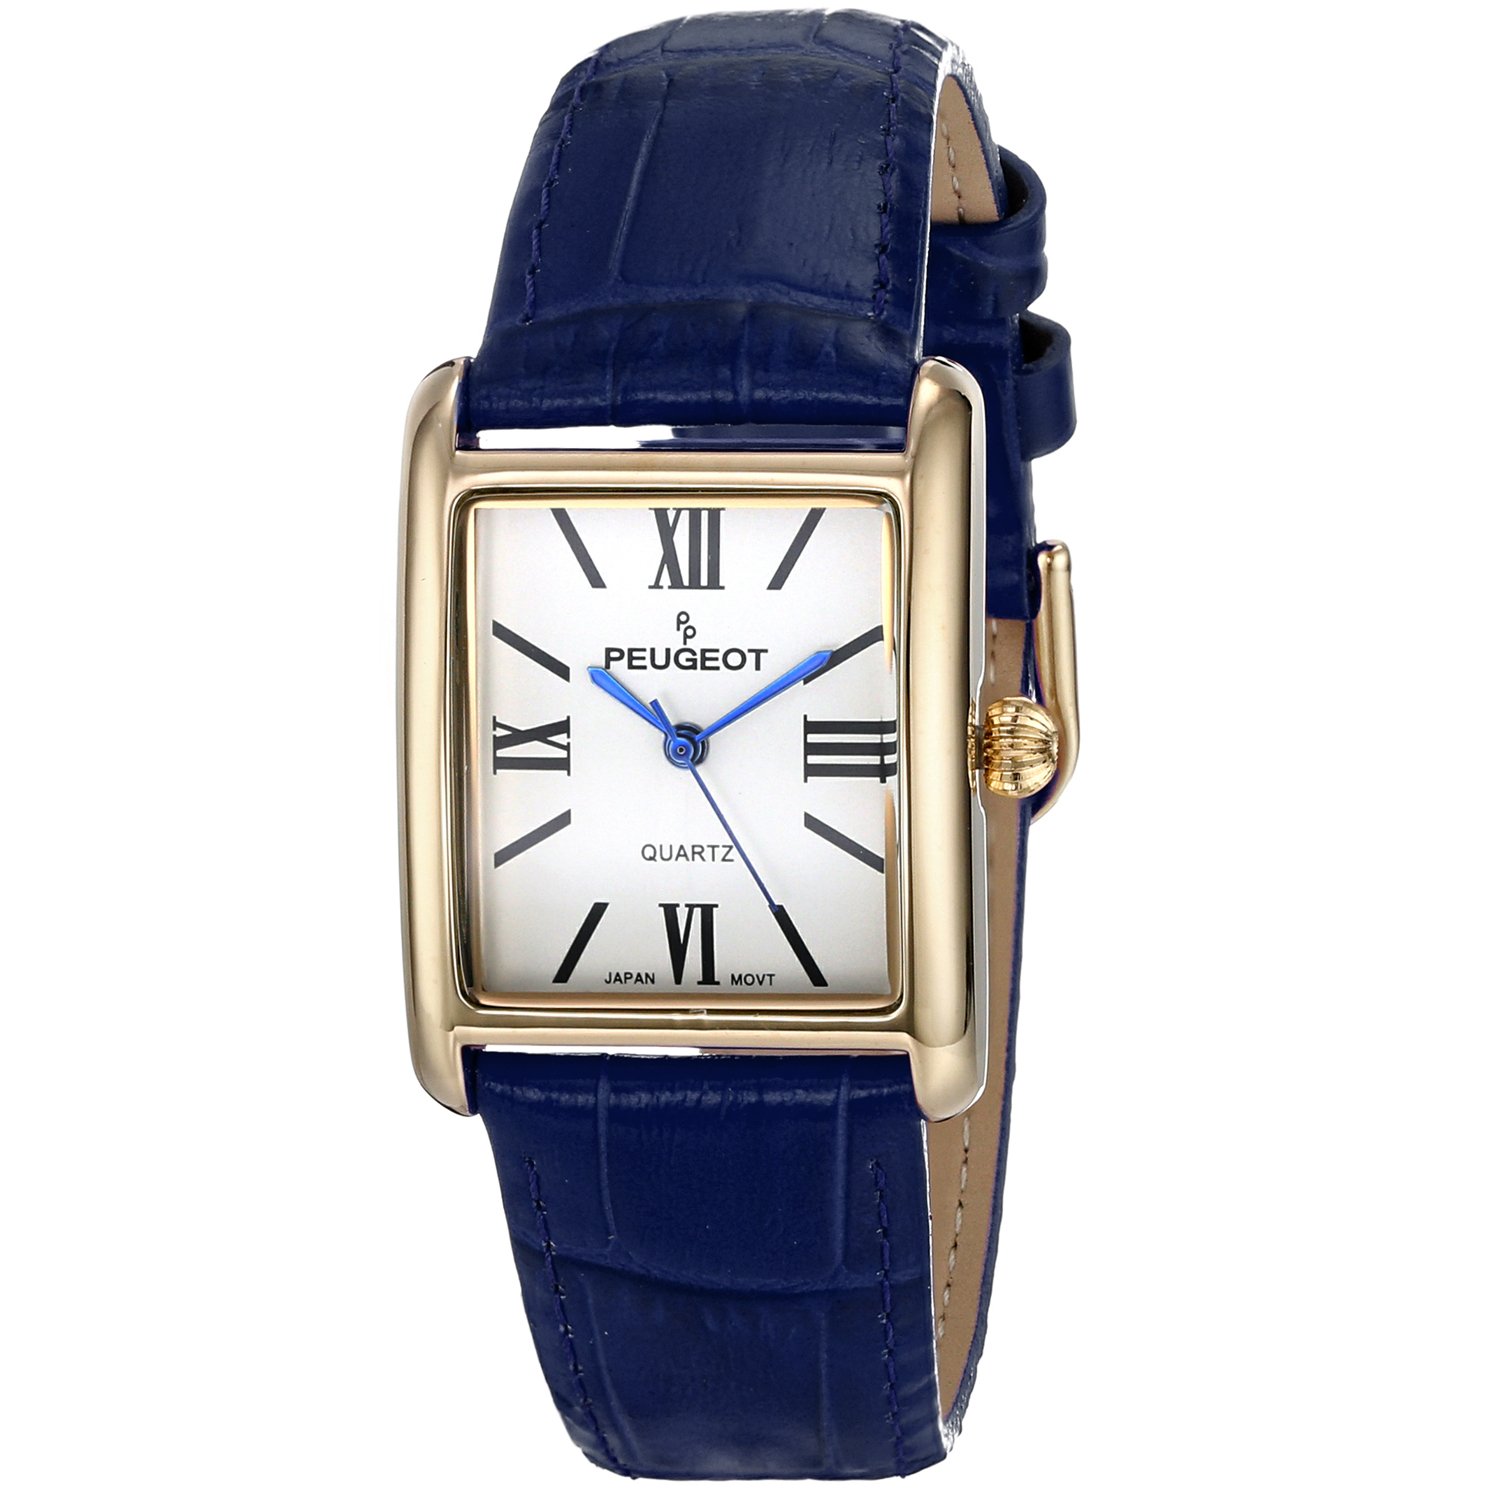 Peugeot Women's 14K Gold Plated Tank Leather Dress Watch with Roman Numerals Dial